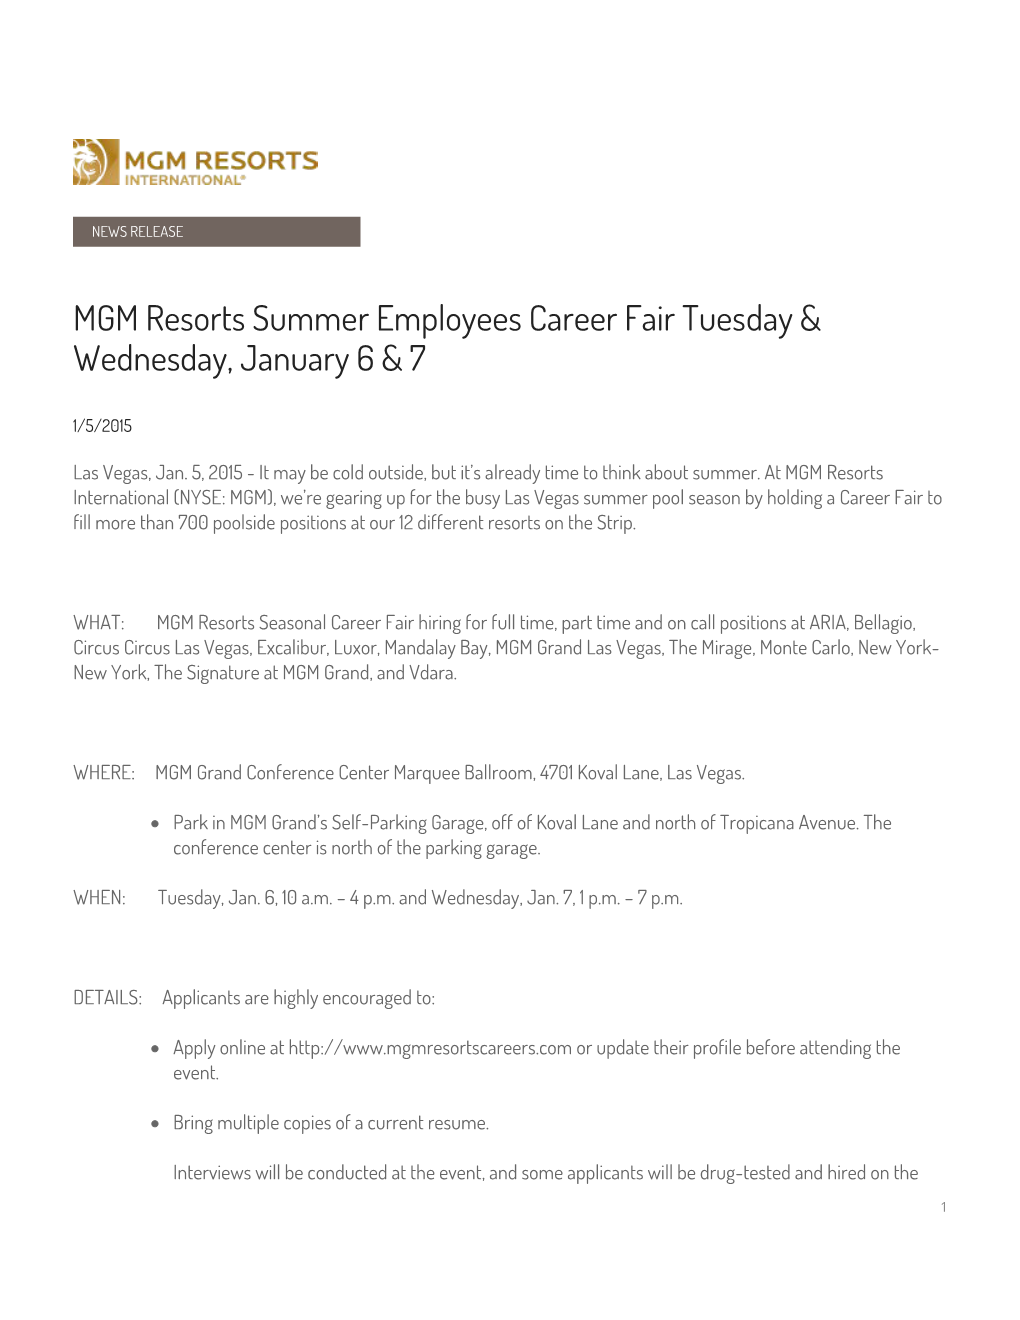 MGM Resorts Summer Employees Career Fair Tuesday & Wednesday